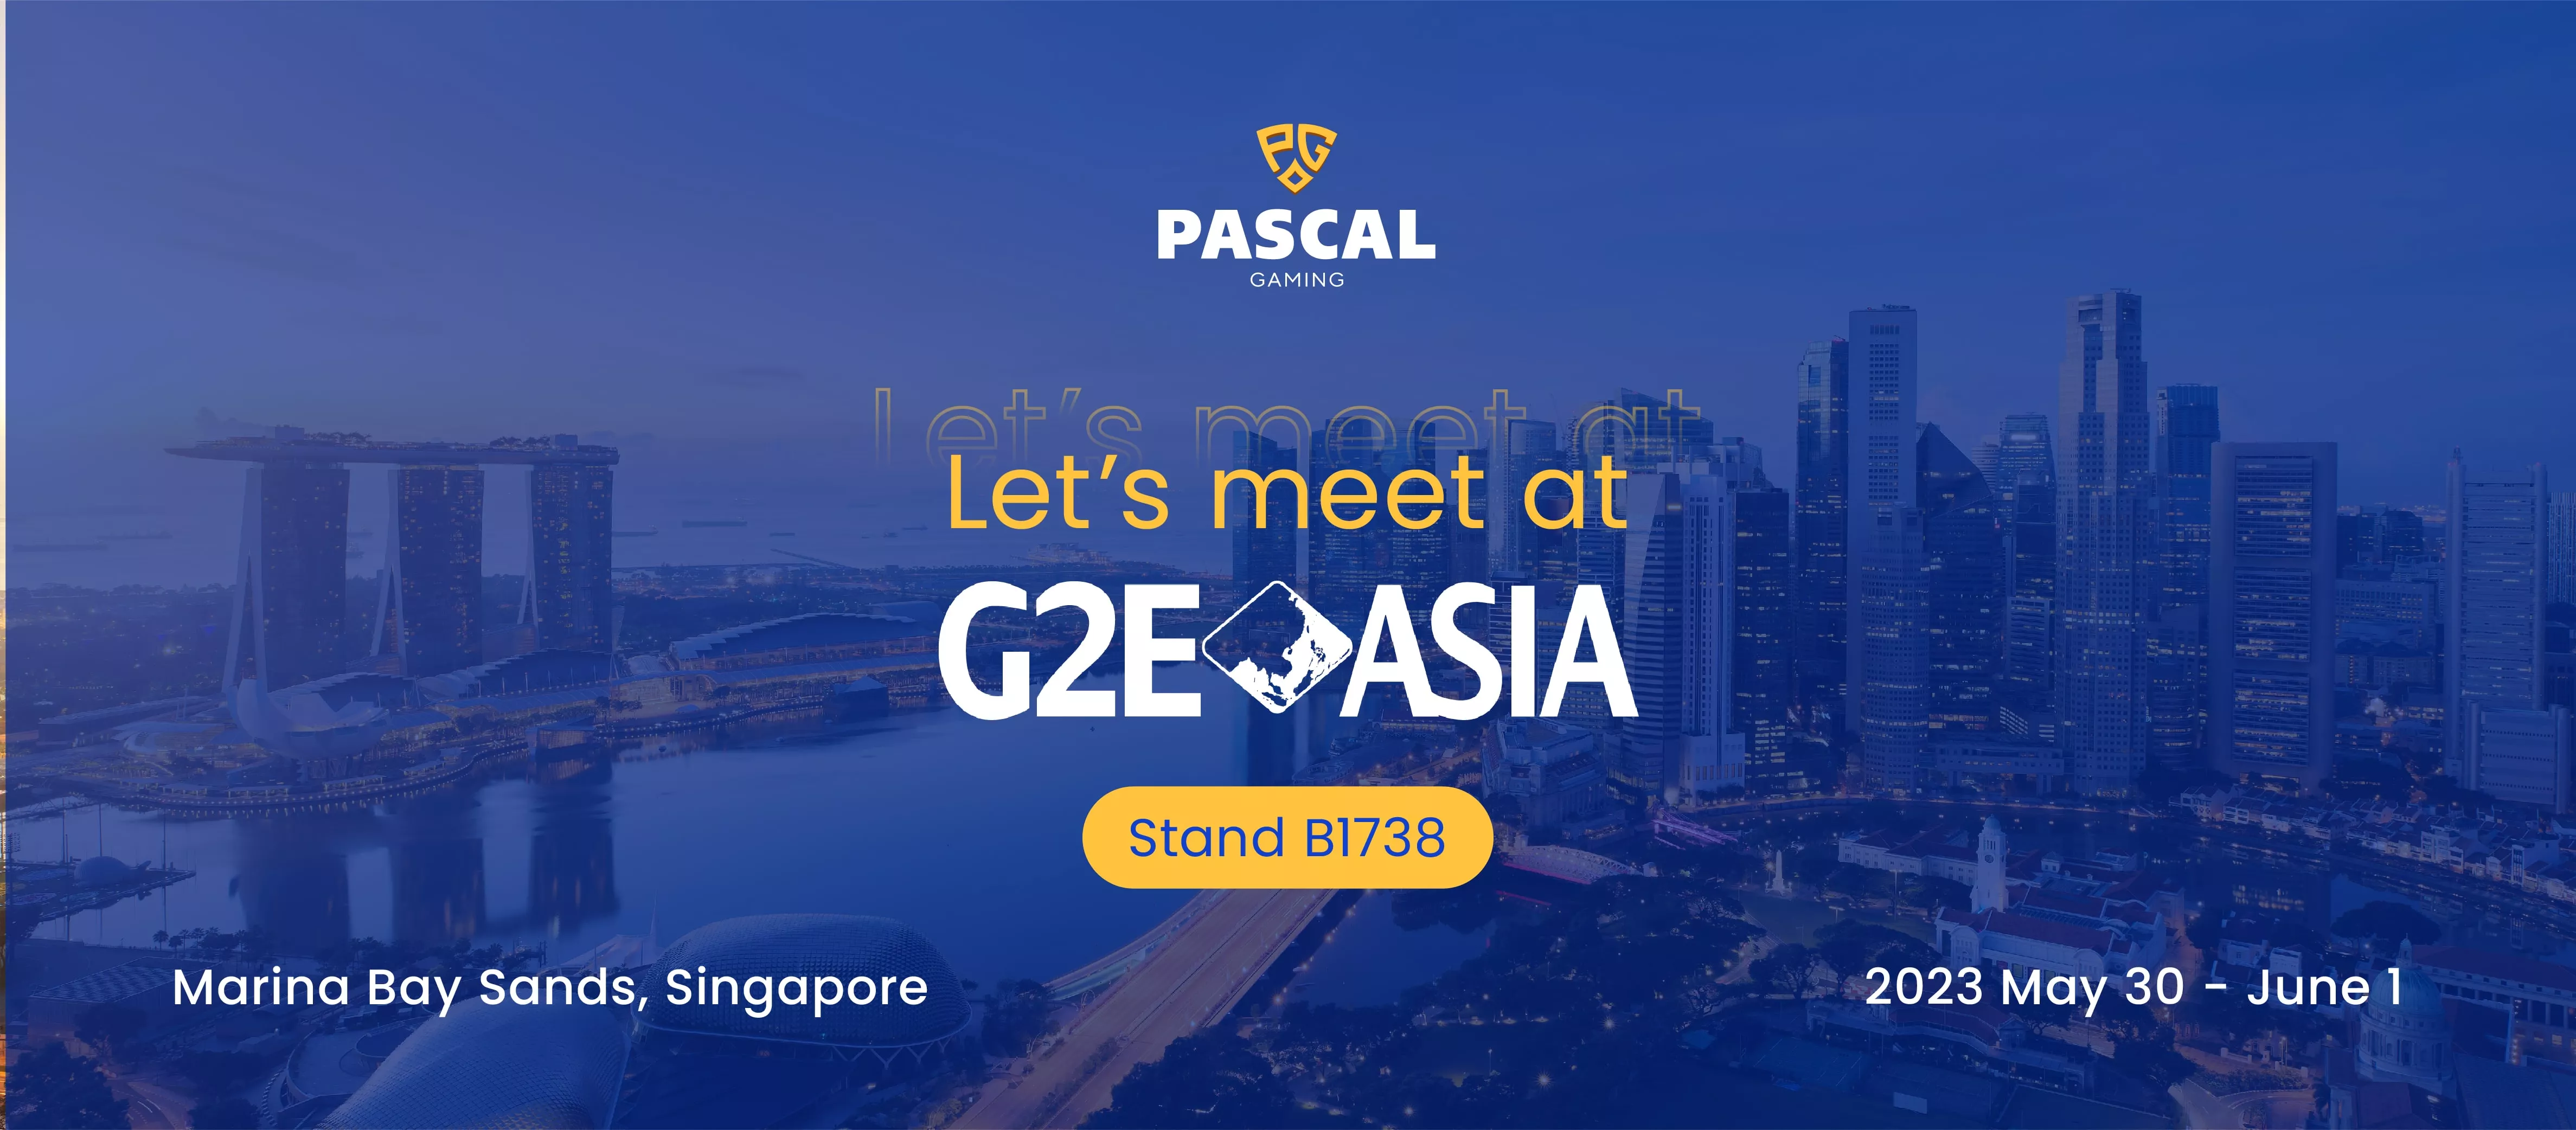 Pascal Gaming Is Heading To G2E Asia 2023